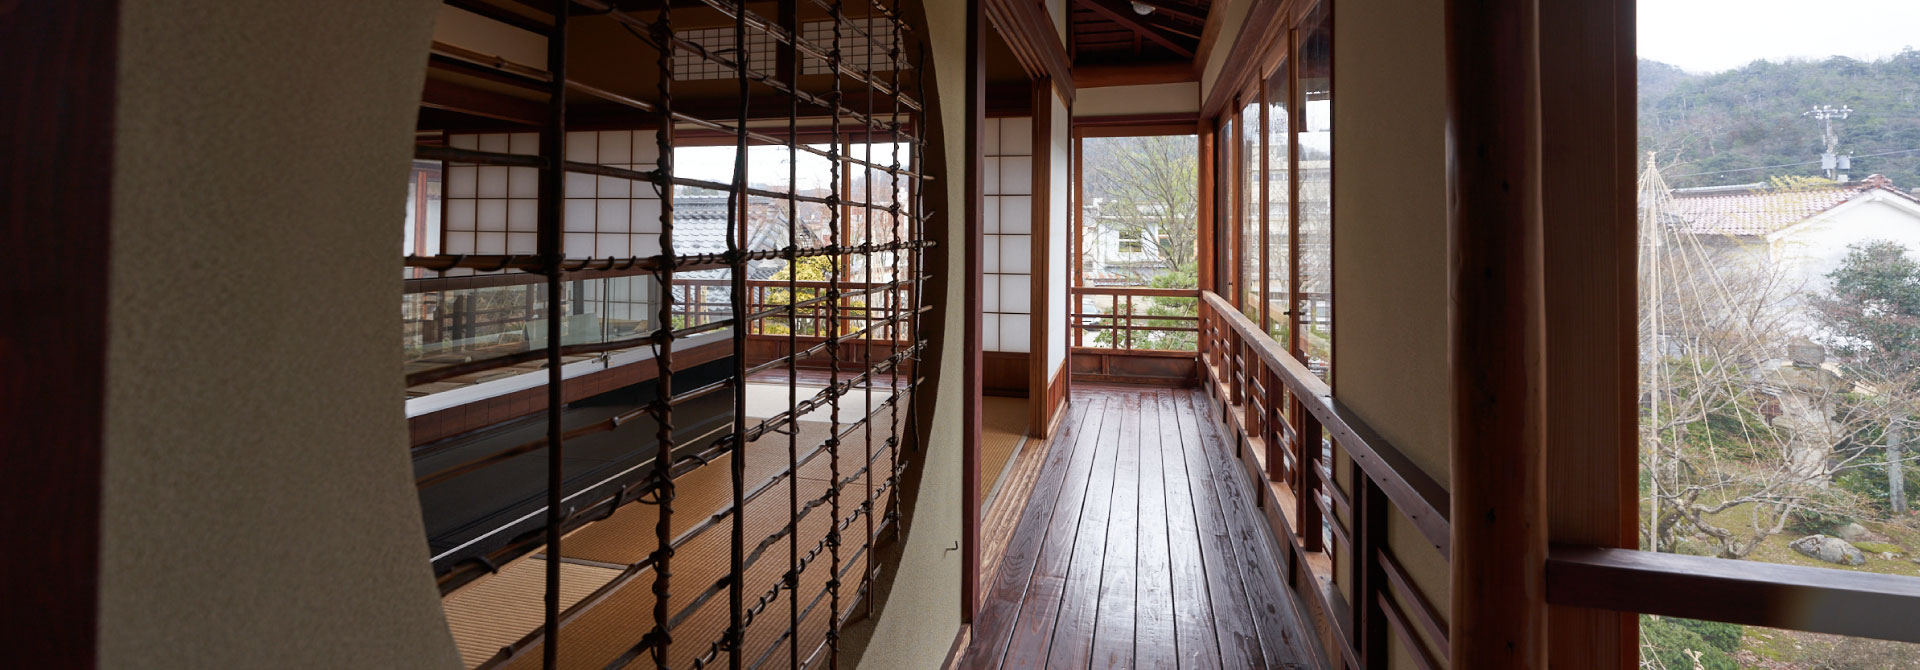 An old building preserved in a nice comdition is changed as a museum for Japanese poet Matsuo Basho.